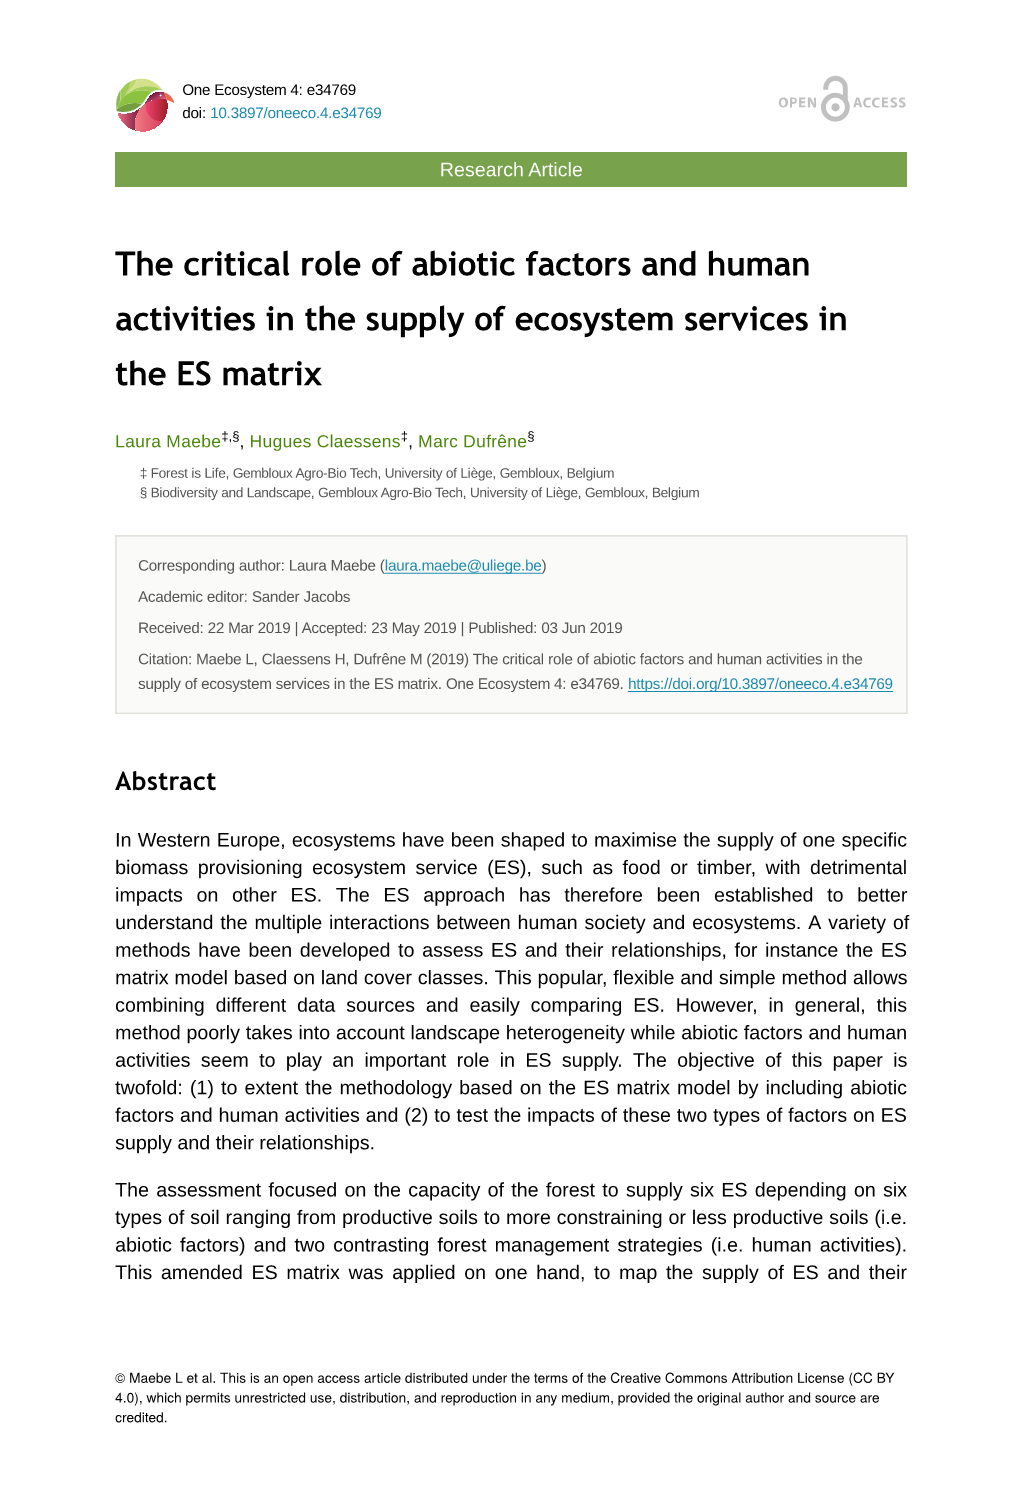 The Critical Role of Abiotic Factors and Human Activities in the Supply of Ecosystem Services in the ES Matrix